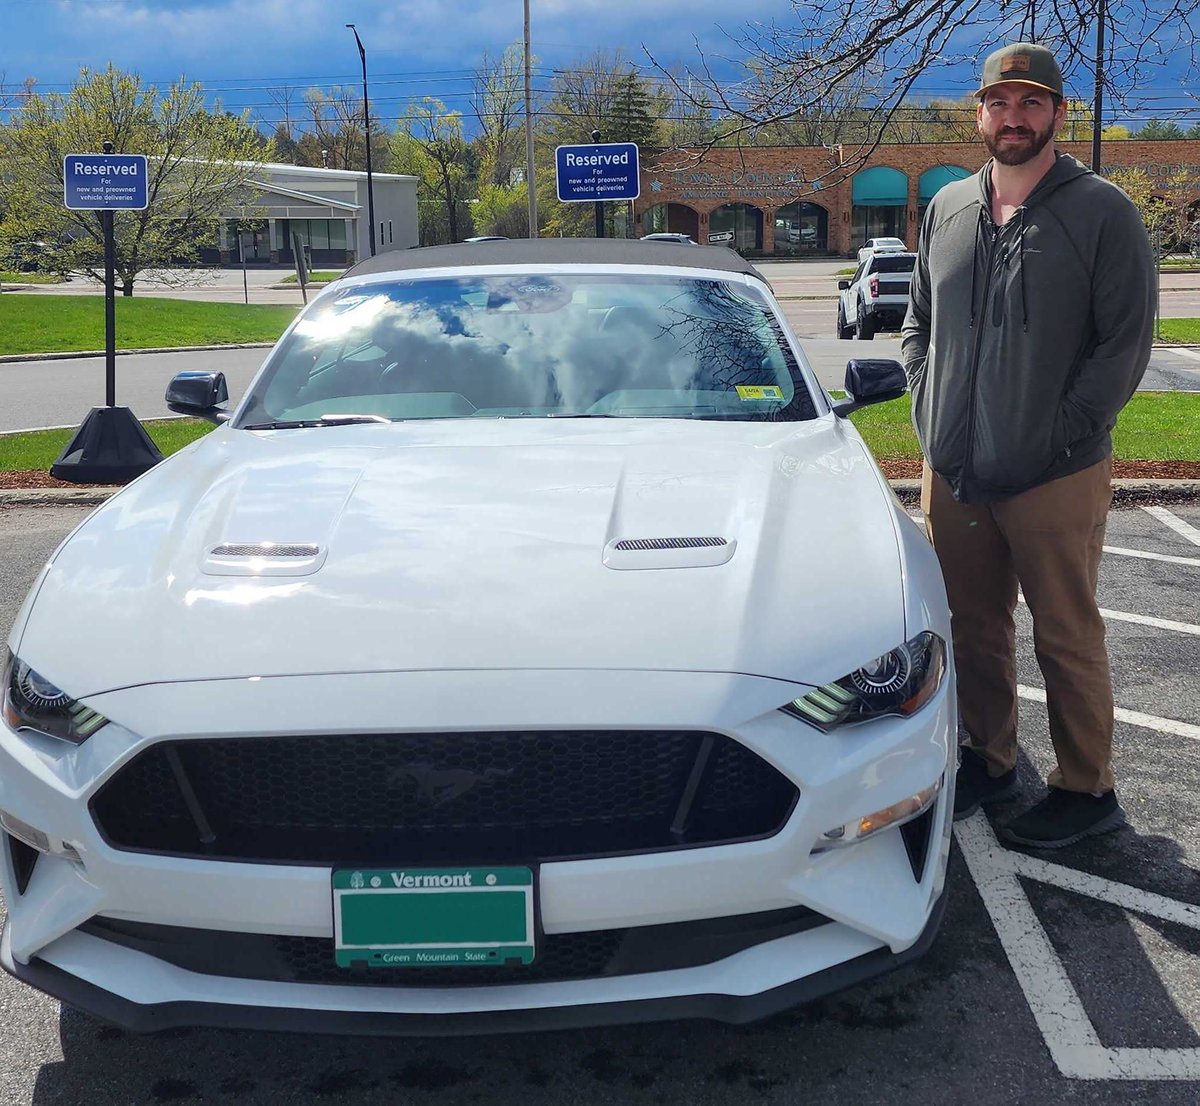 Happy #NewCarDay to Justin! He's ready to take advantage of the summer driving season, thanks to this incredible @Ford @FordMustang GT Convertible he picked out w/Nathan Wardwell - Congrats!

Learn more about Nathan & check out his reviews on @DealerRater: bit.ly/2PpAW9k